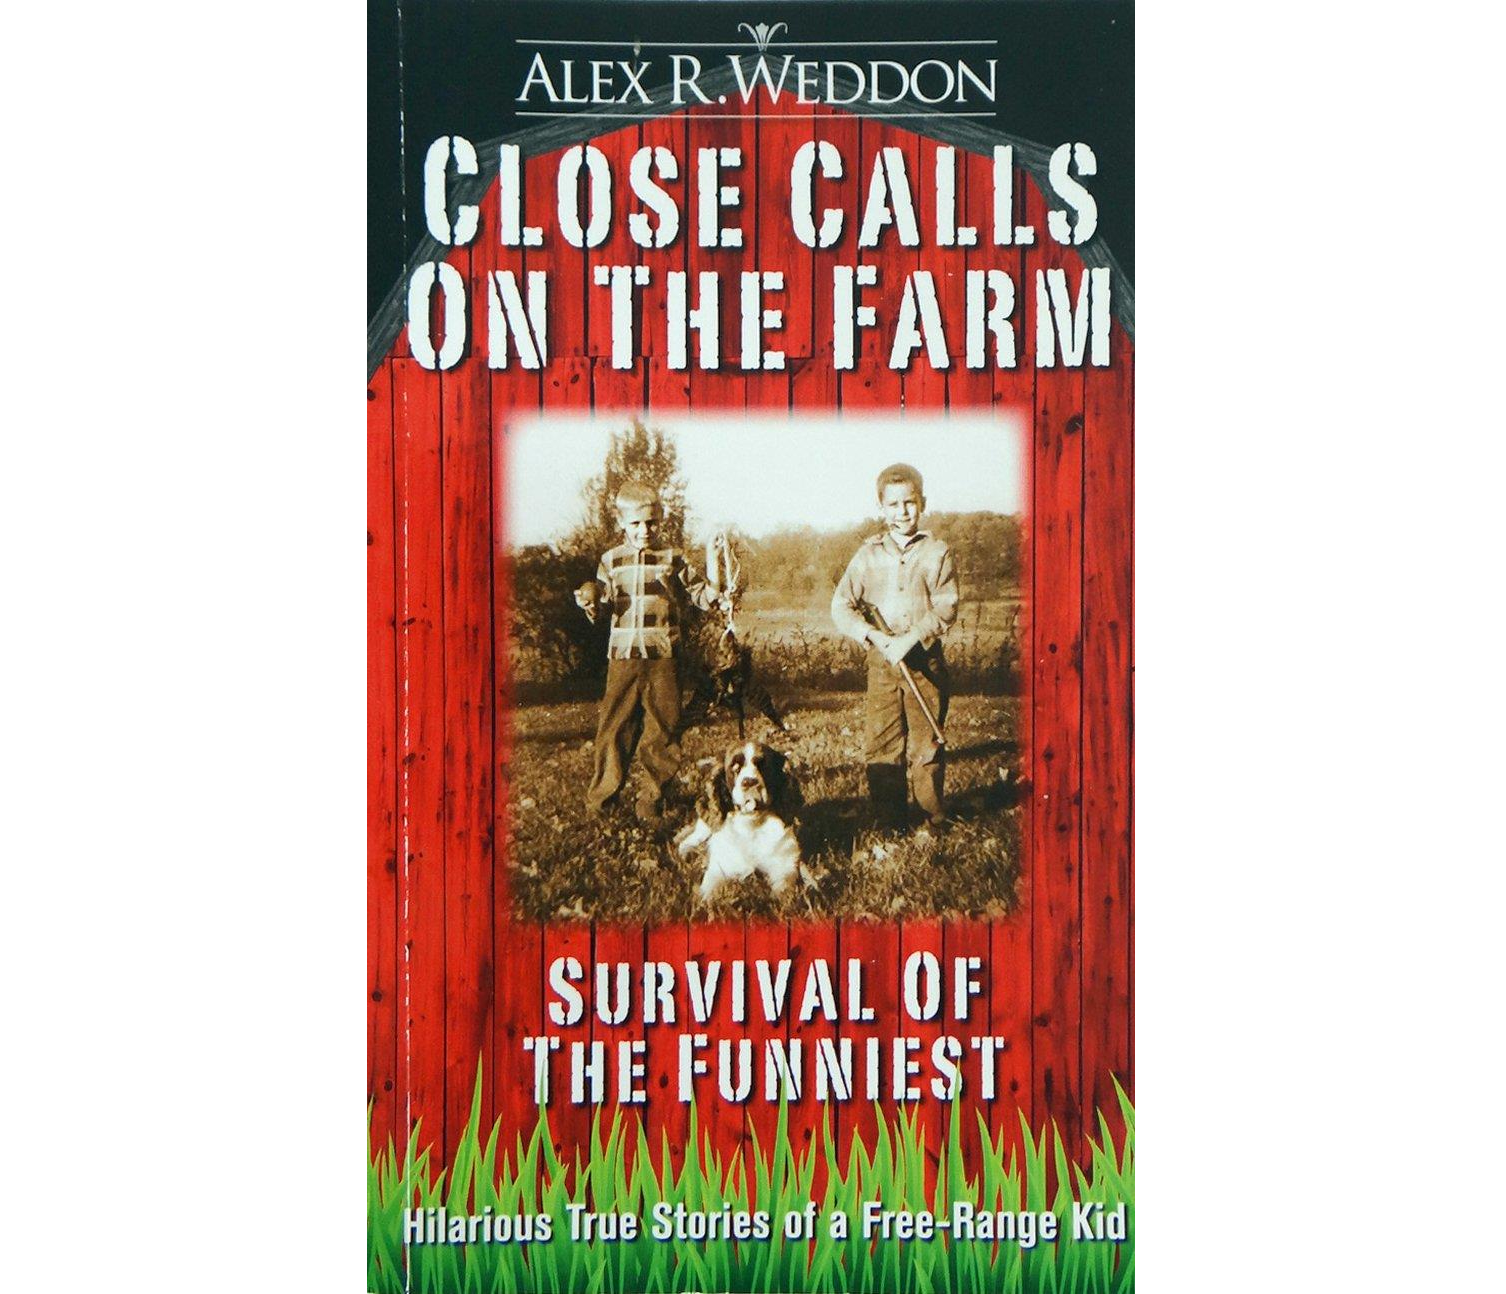 Close Calls on the Farm: Survival of the Funniest